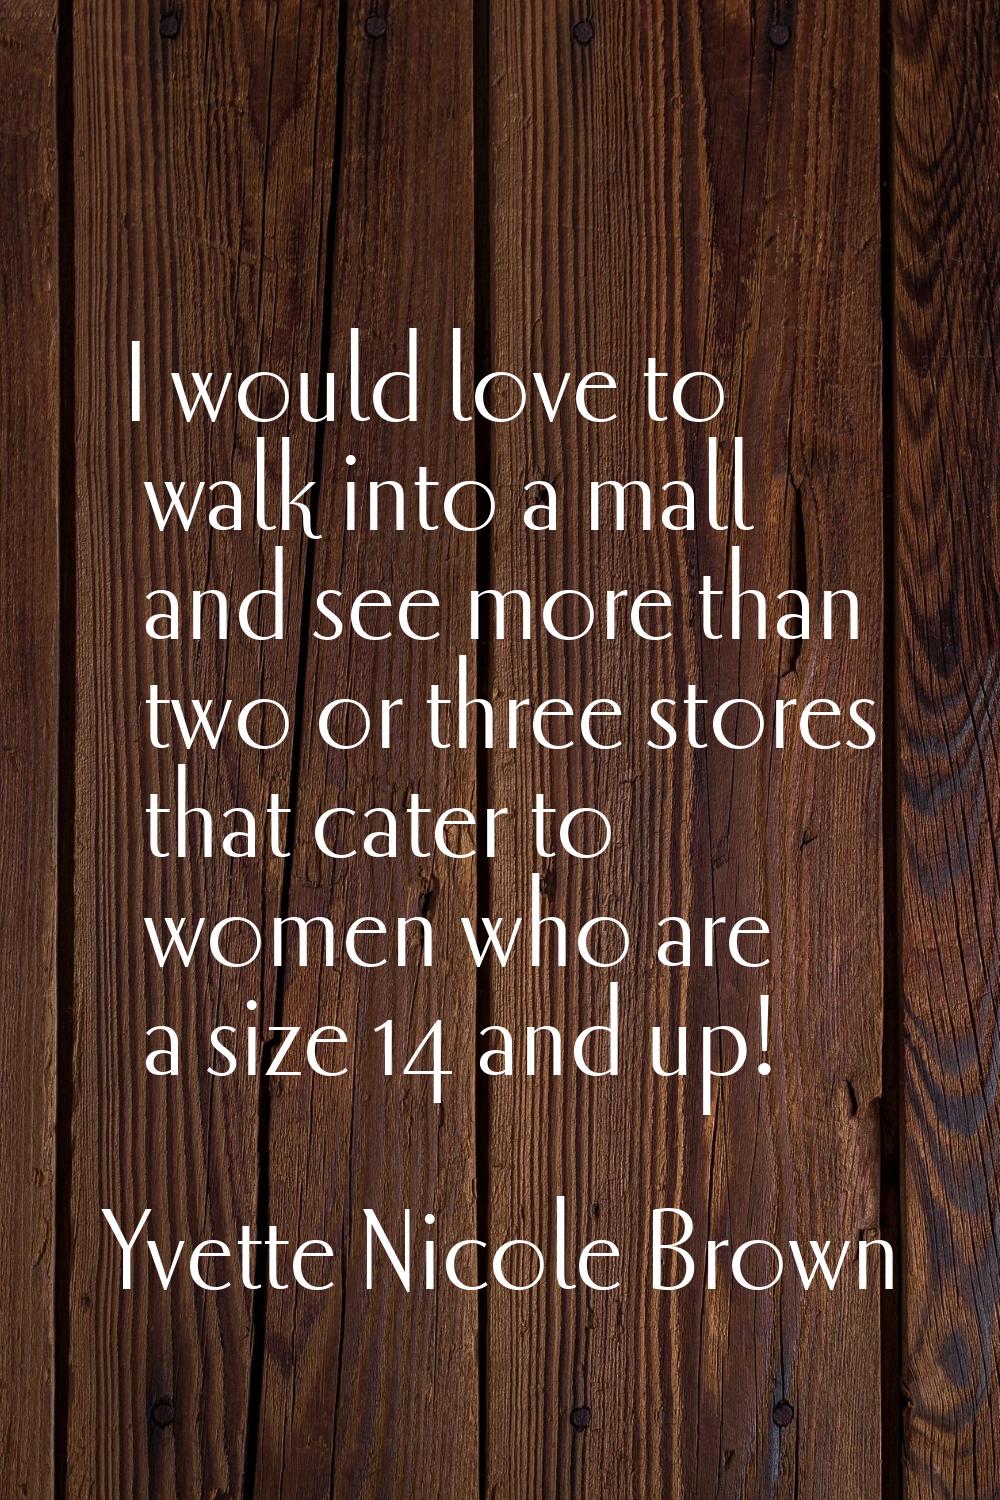 I would love to walk into a mall and see more than two or three stores that cater to women who are 